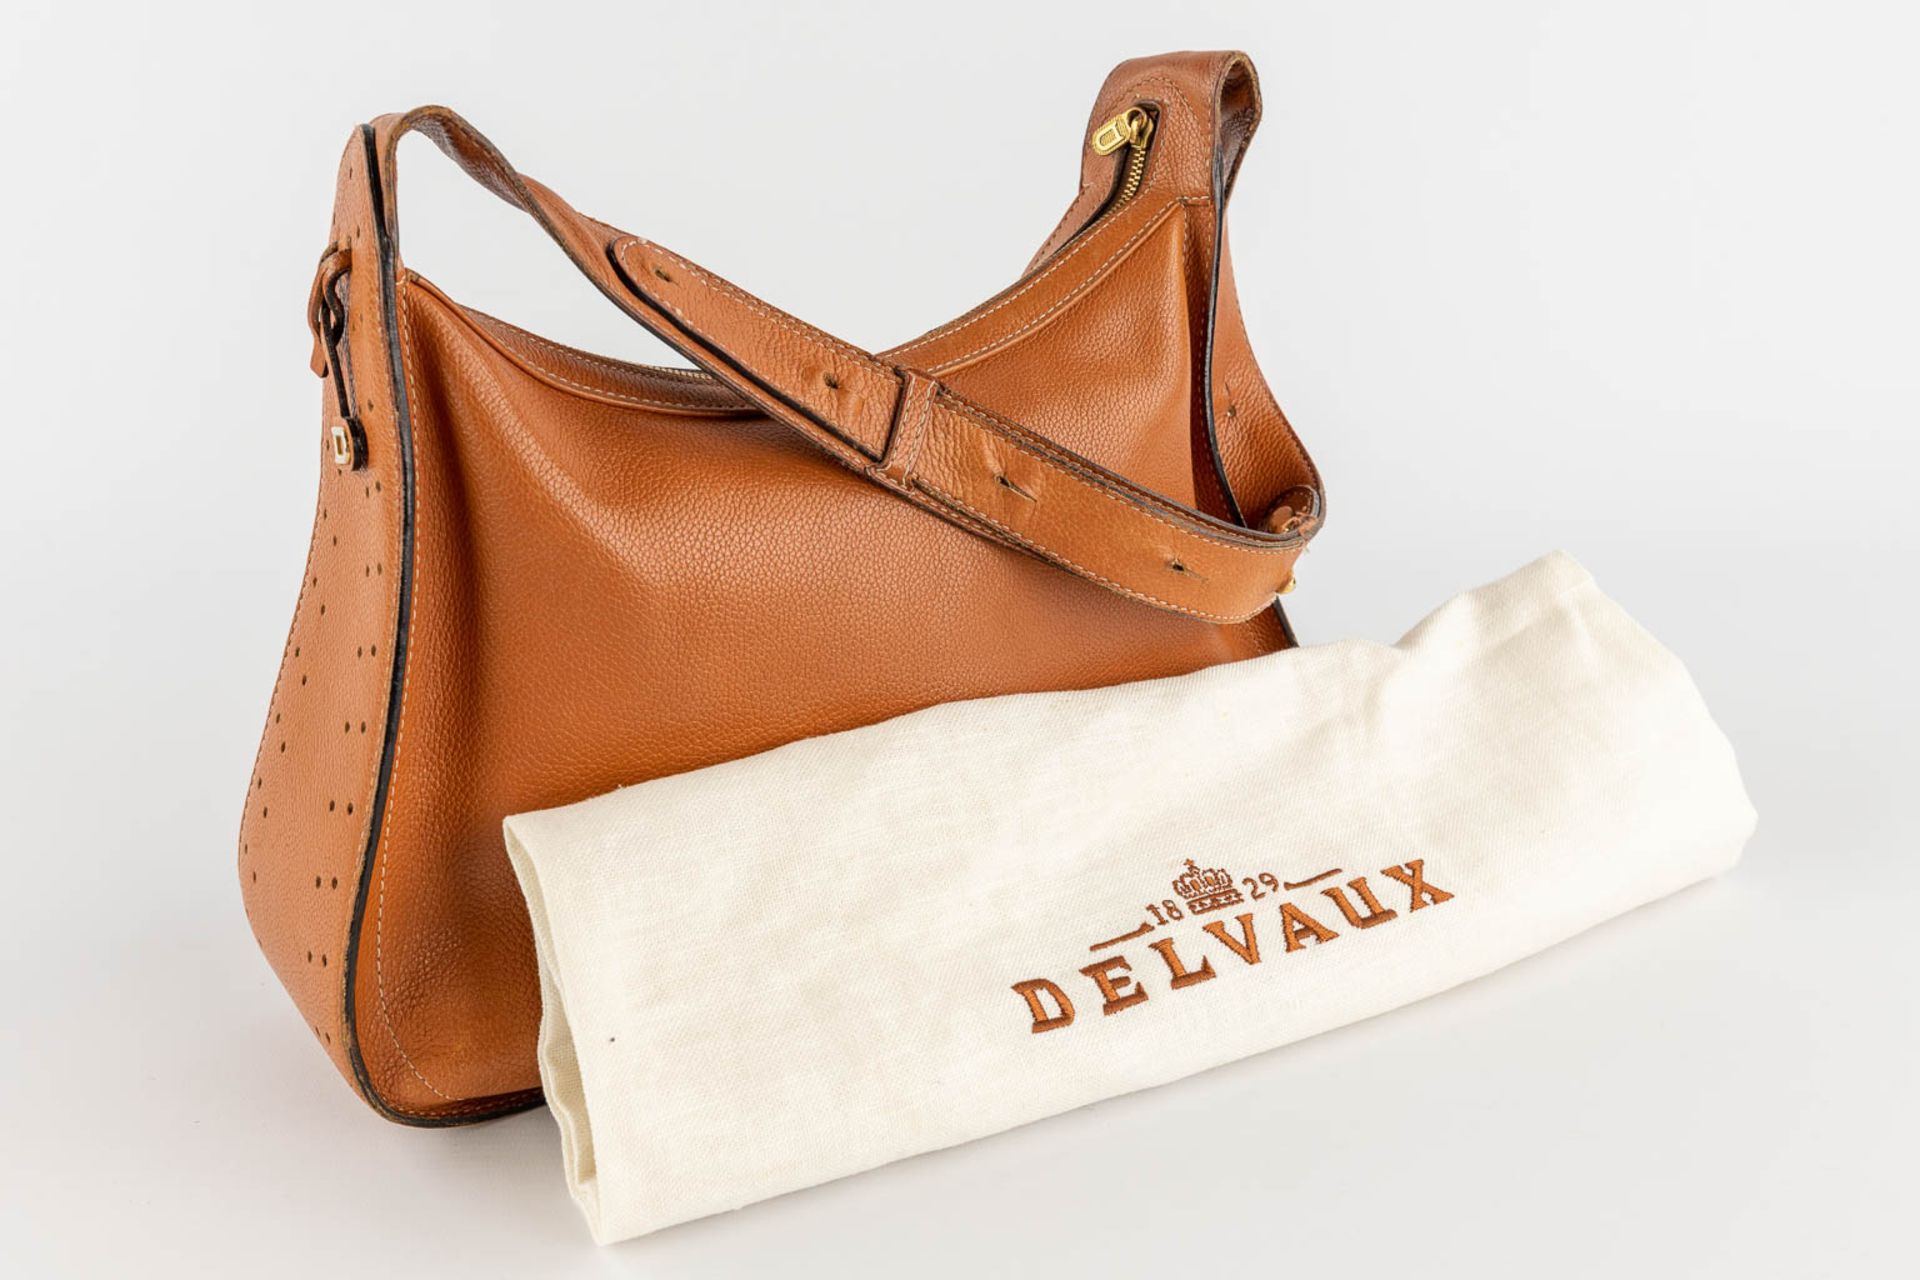 Delvaux, Pensée, a handbag made of brown leather. (W:24 x H:32 cm) - Image 2 of 18